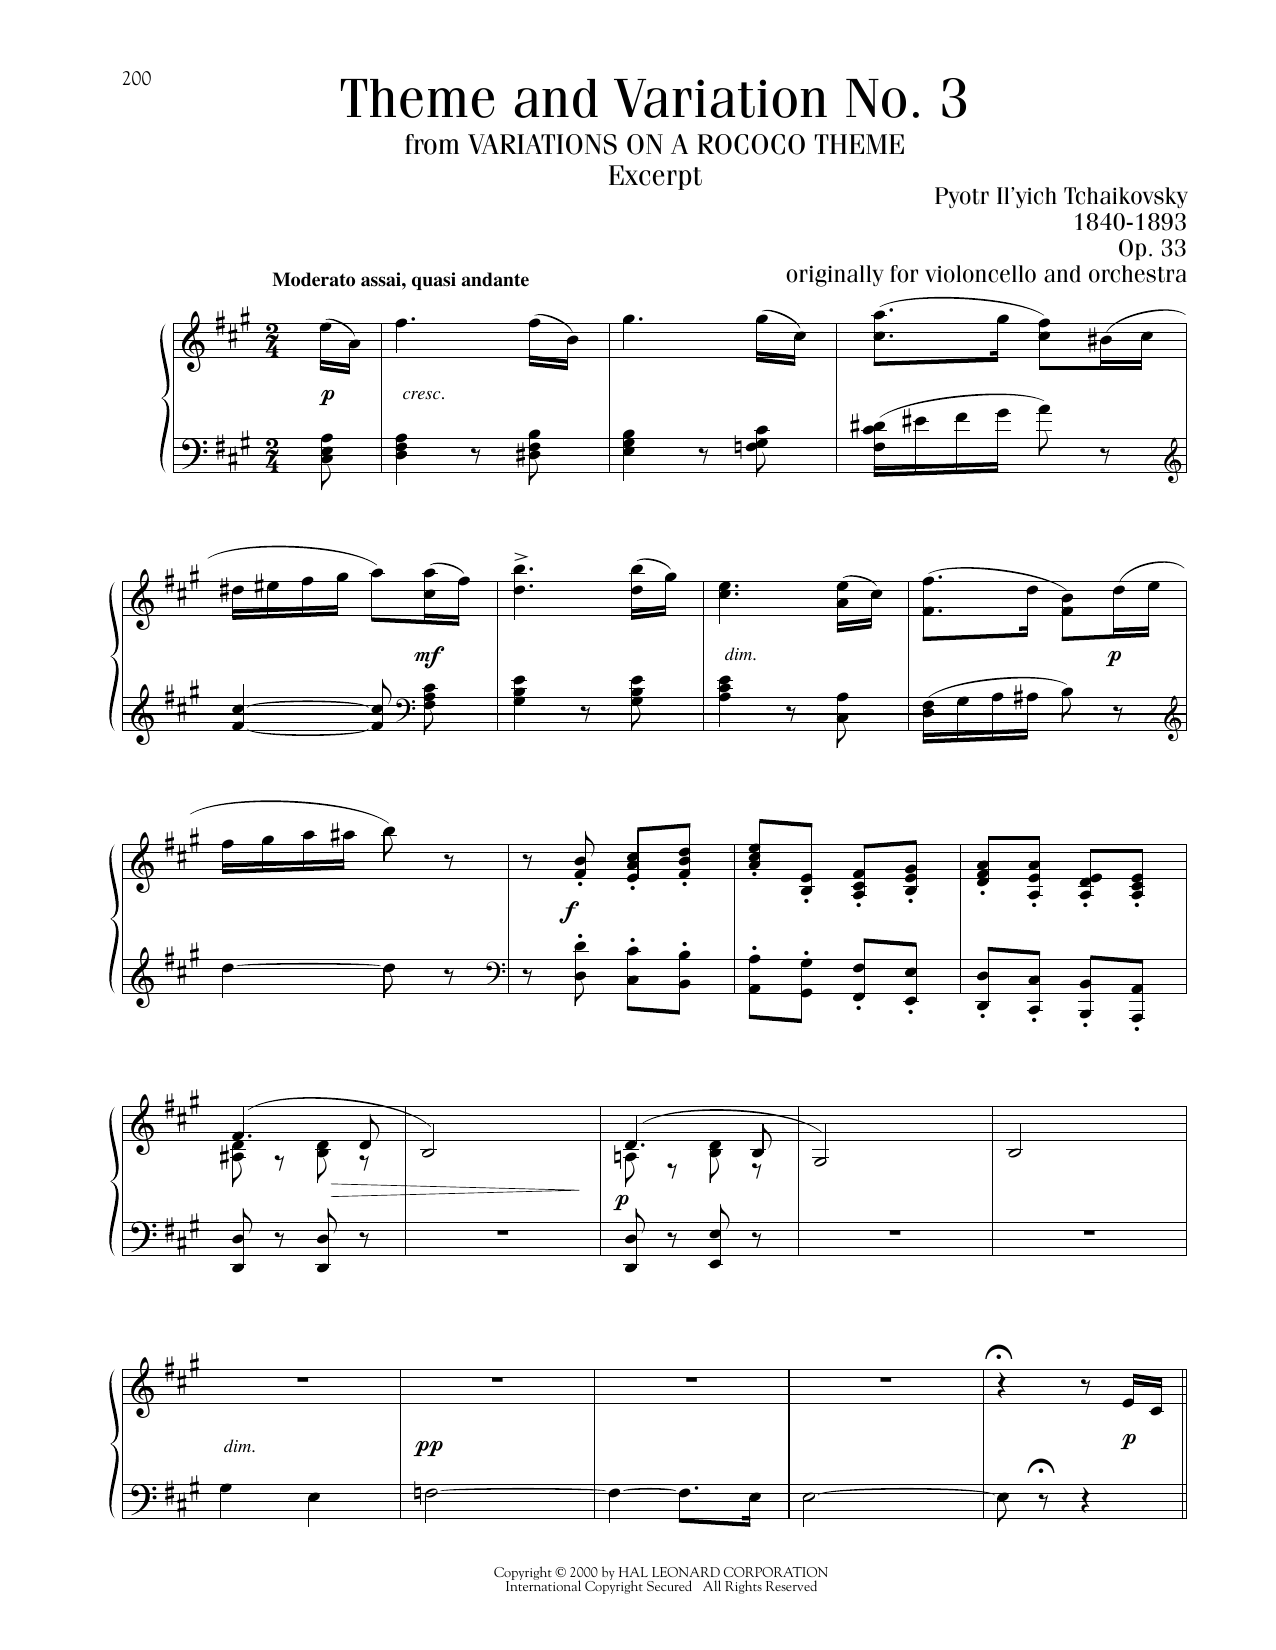 Pyotr Il'yich Tchaikovsky Theme And Variation No. 3, Op. 33 sheet music notes printable PDF score